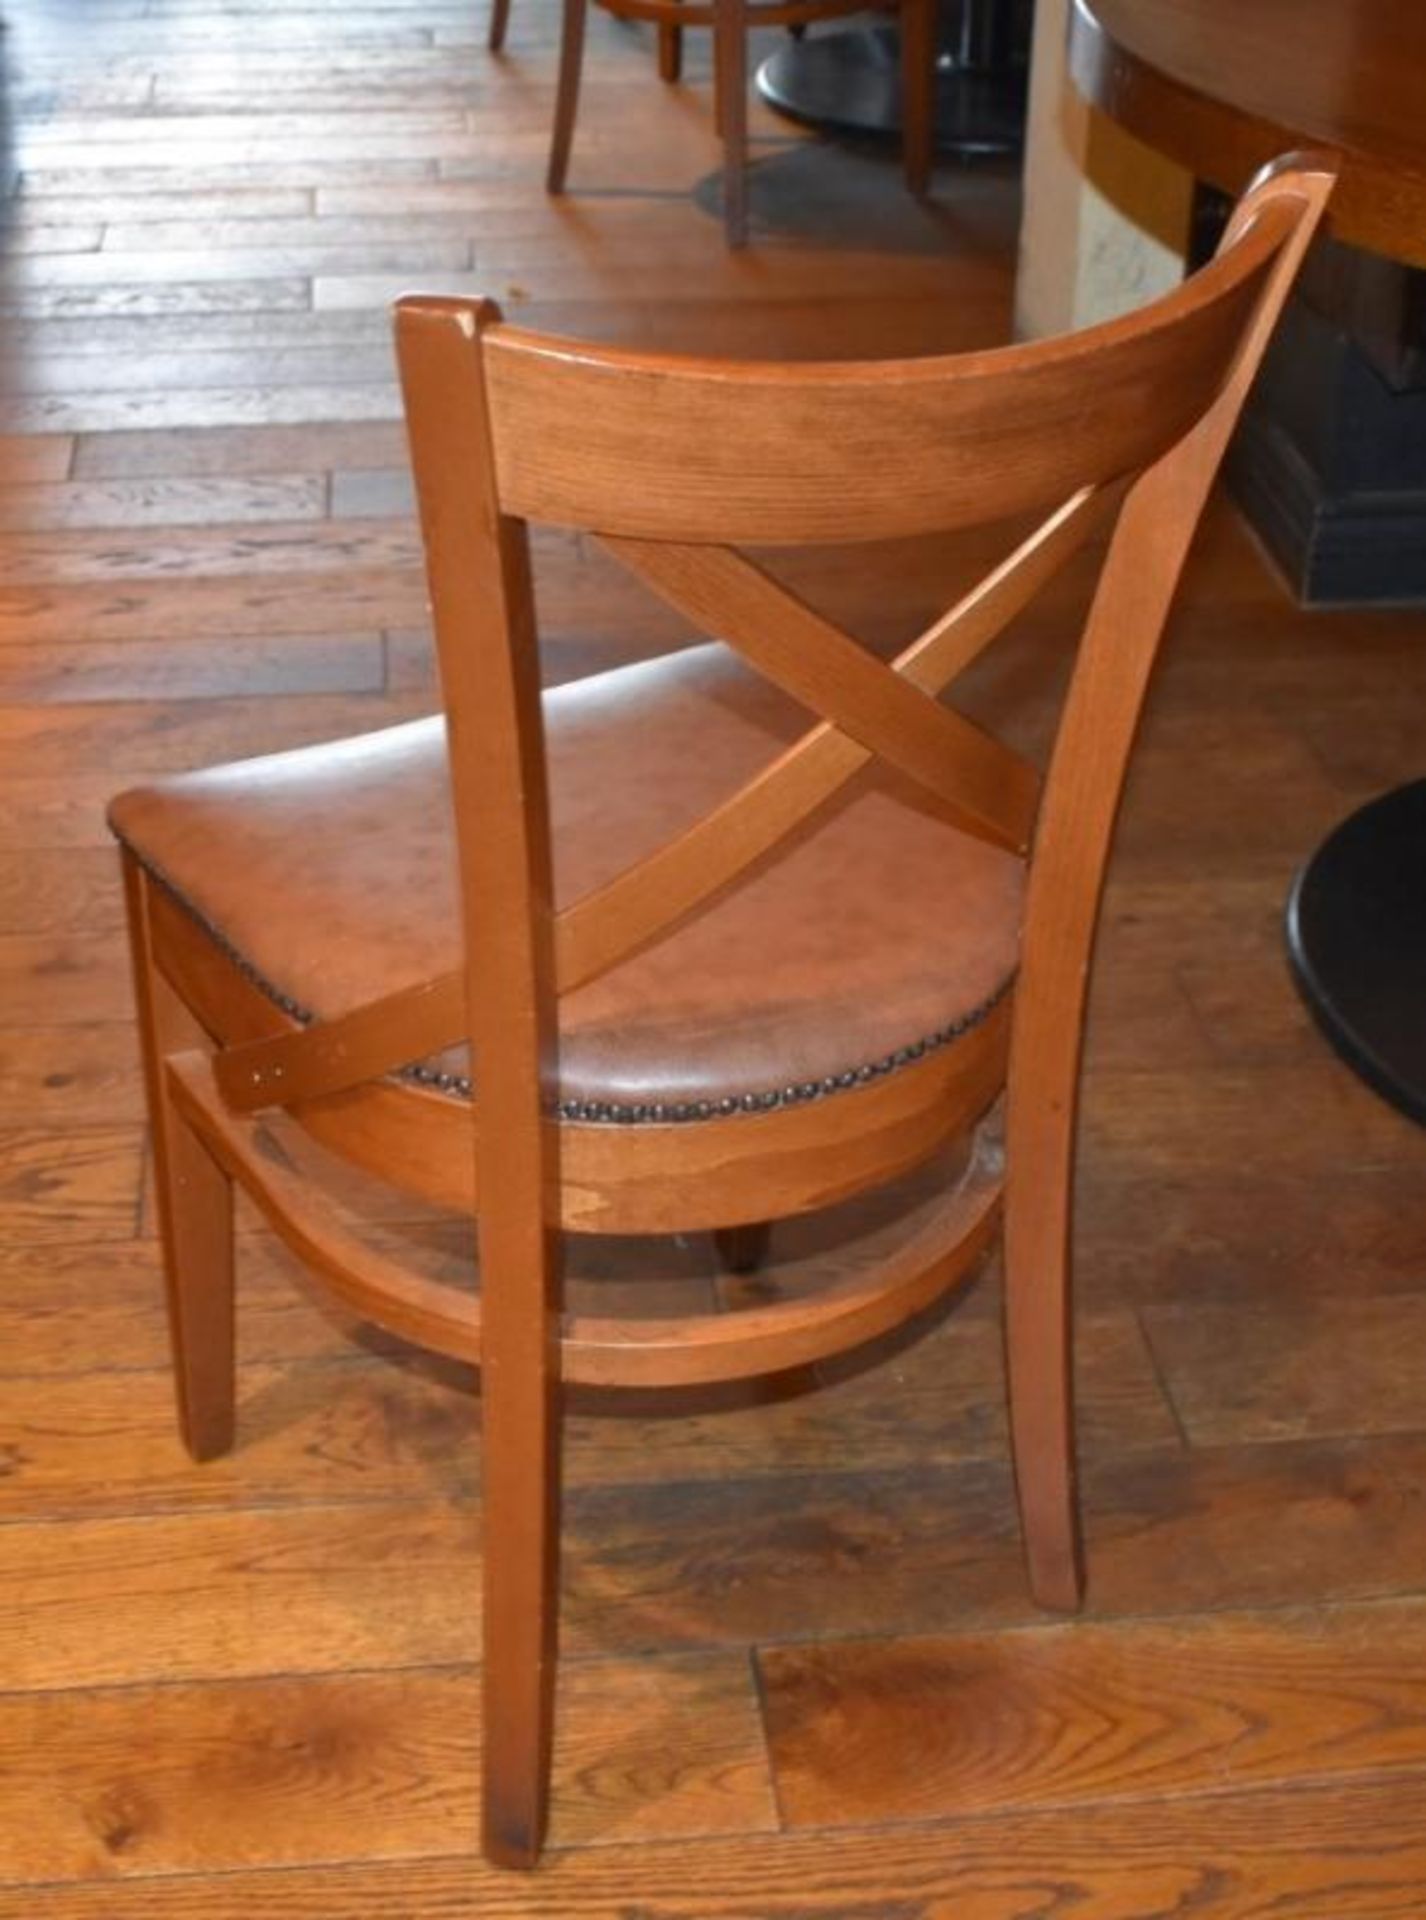 15 x Restaurant Dining Chairs With Wooden Crossbacks and Faux Leather Brown Seat Pads H84 x W45 cms - Image 2 of 4